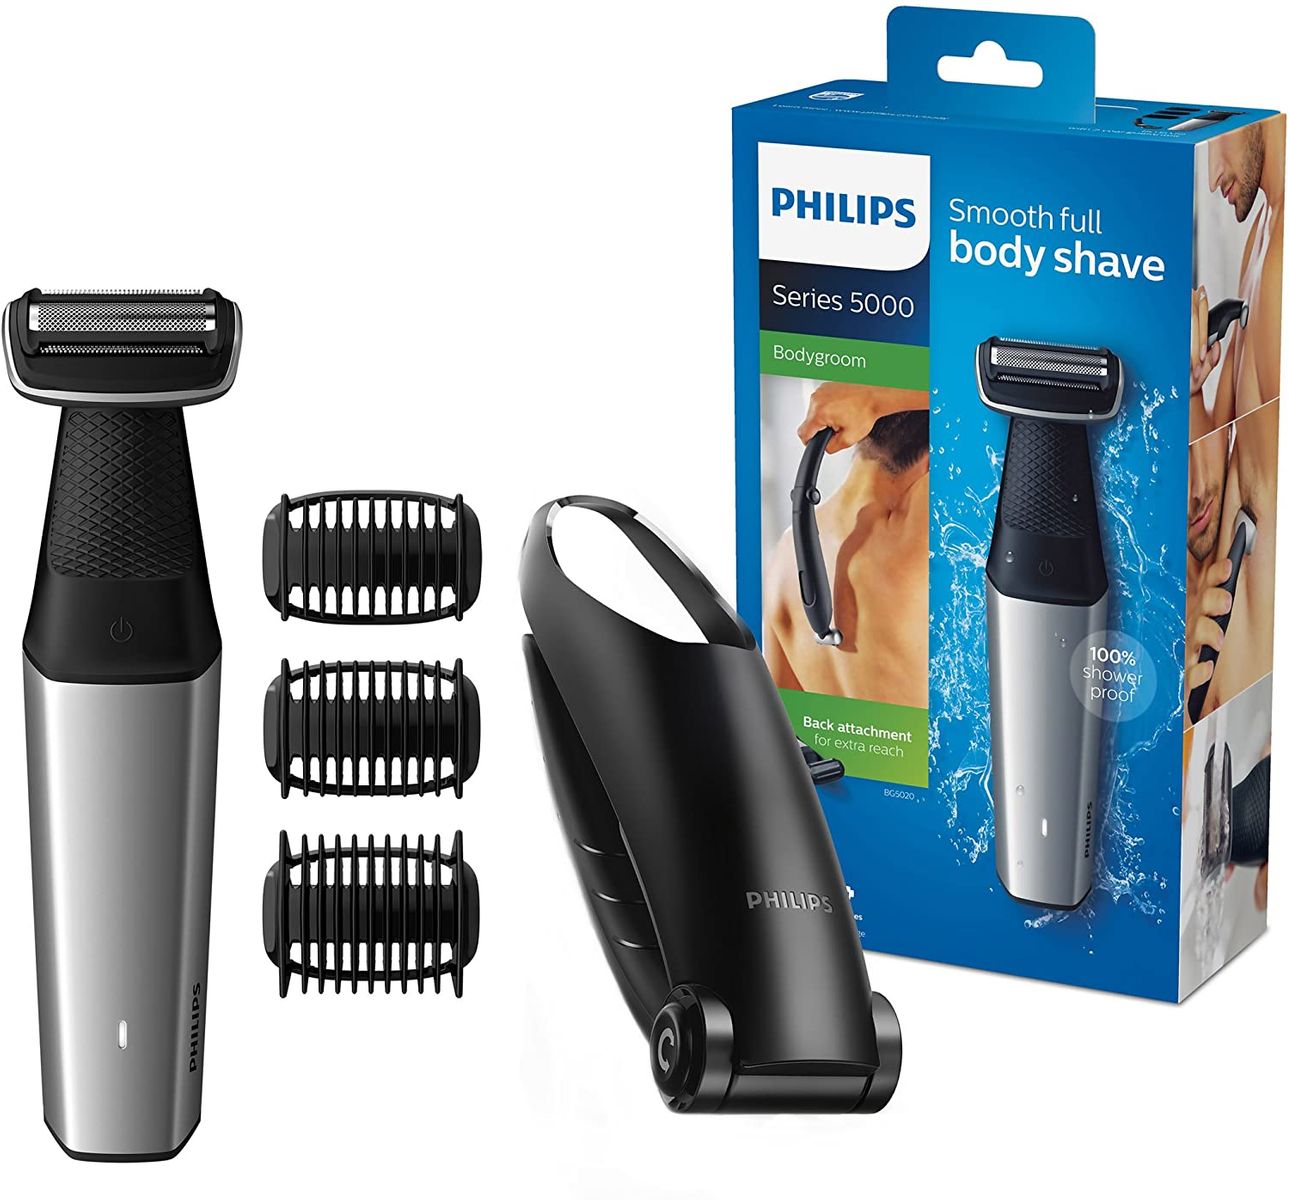 Philips Bodygroom Series 5000 with attachment for back hair removal BG5020/15 (incl. 3 comb attachments)